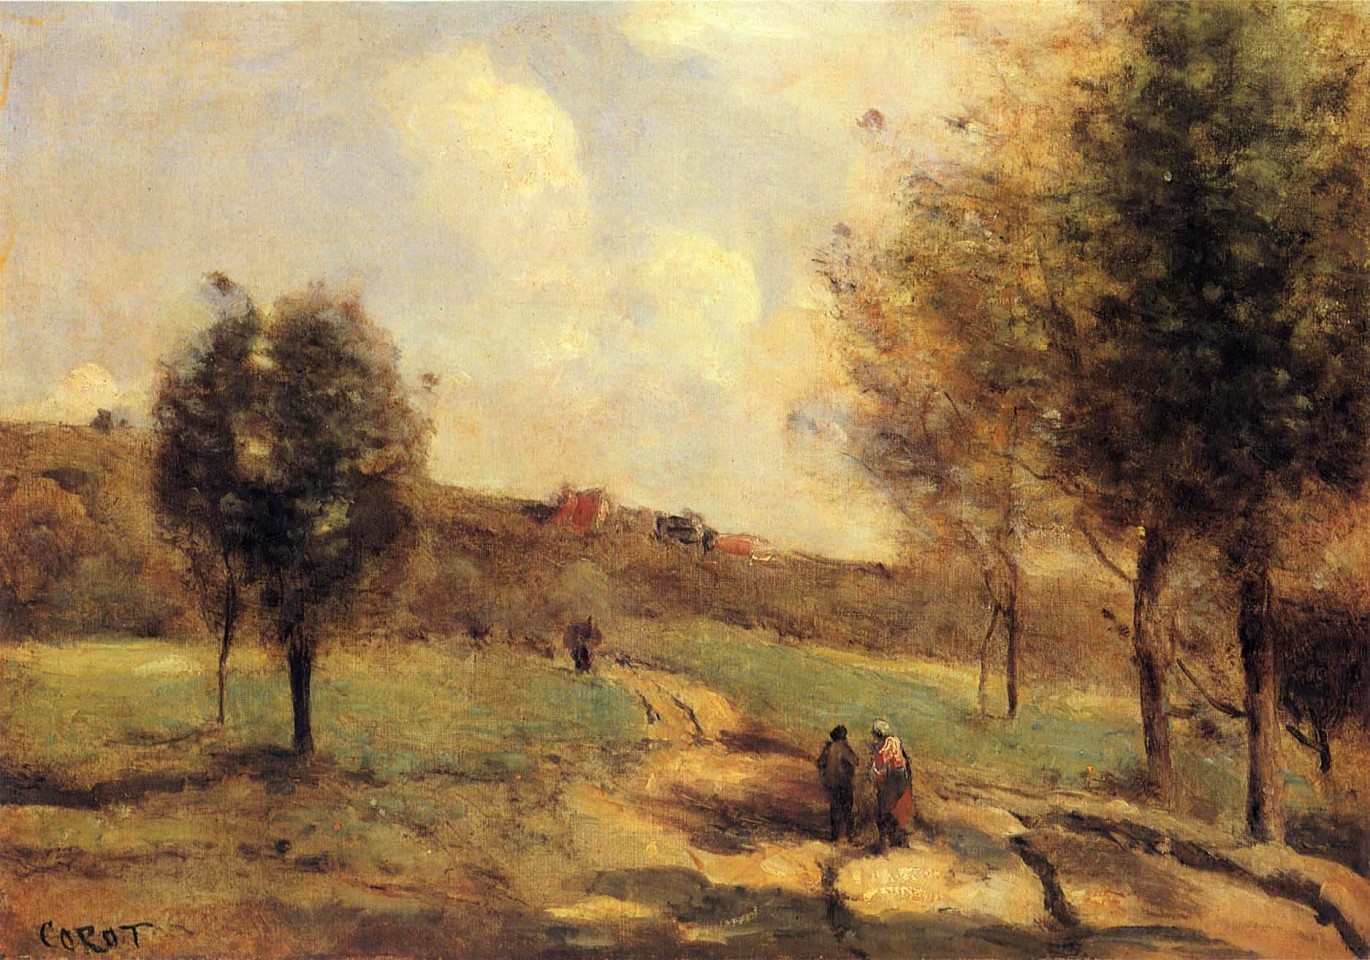 Jean Baptiste Camille Corot, Coubron - Route Montante, ca. 1870
Oil on canvas, 10 x 14 in. (25.4 x 35.6 cm)
COR-007-PA
$240,000